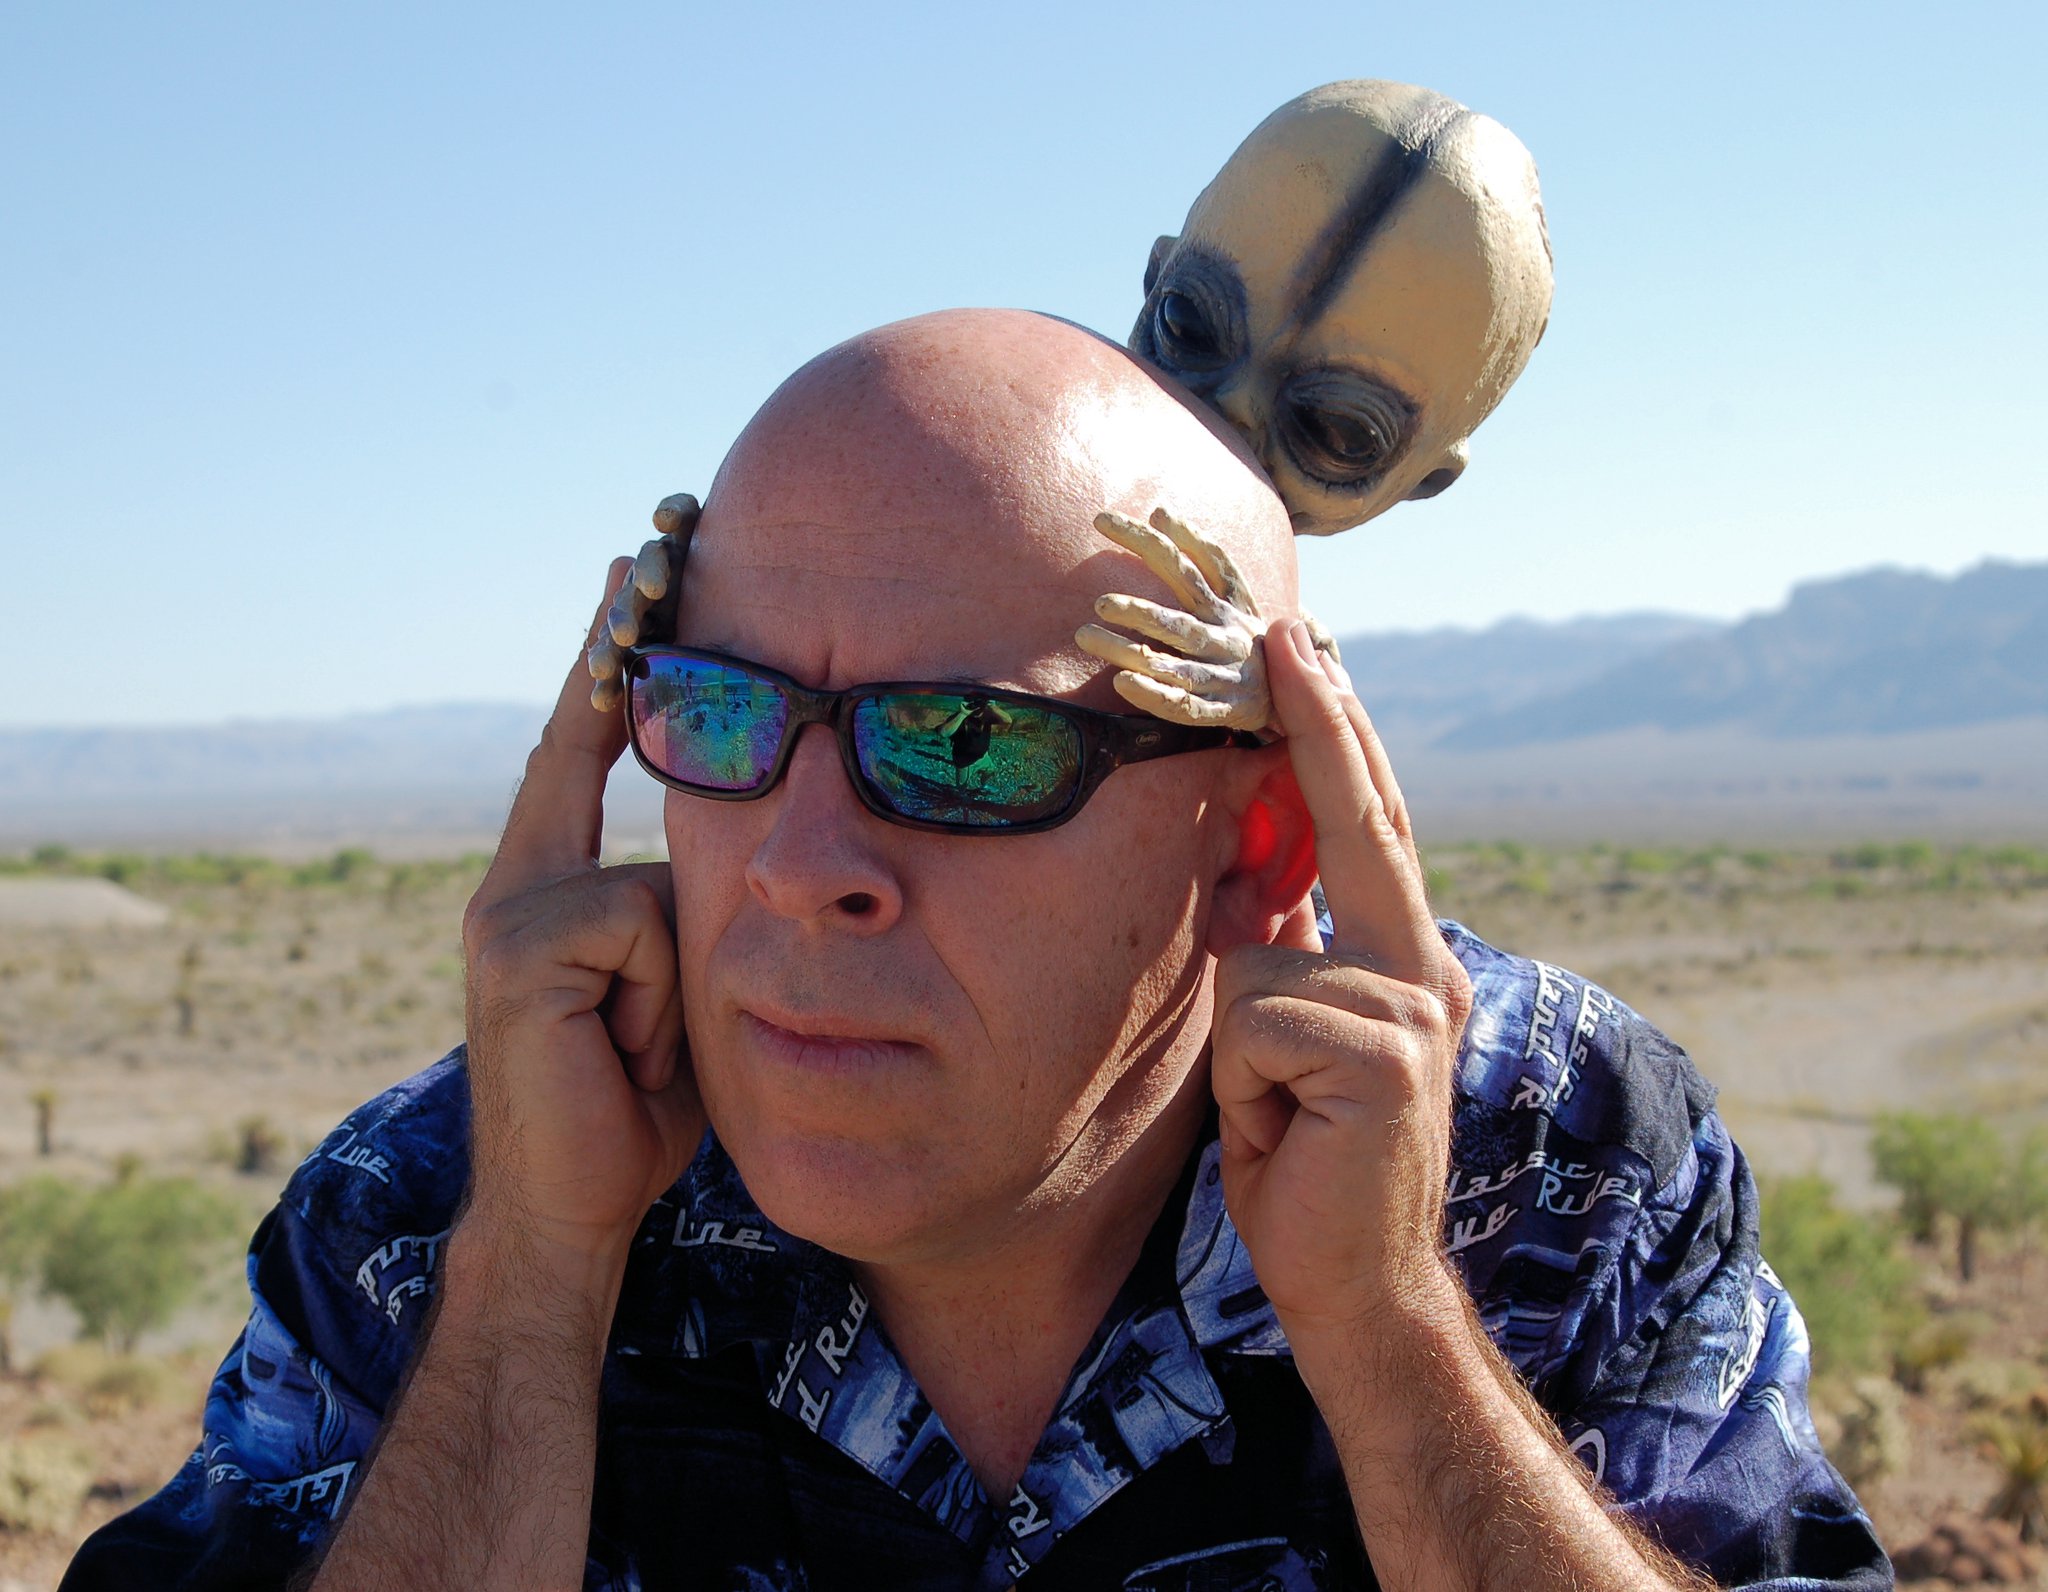 Haunted by an alien presence near Area 51, Nevada. Glenn has been followed by aliens since the 1990s, which he was an authority on Area 51. Glenn is an professed agnostic on aliens - neither believing nor disbelieving.